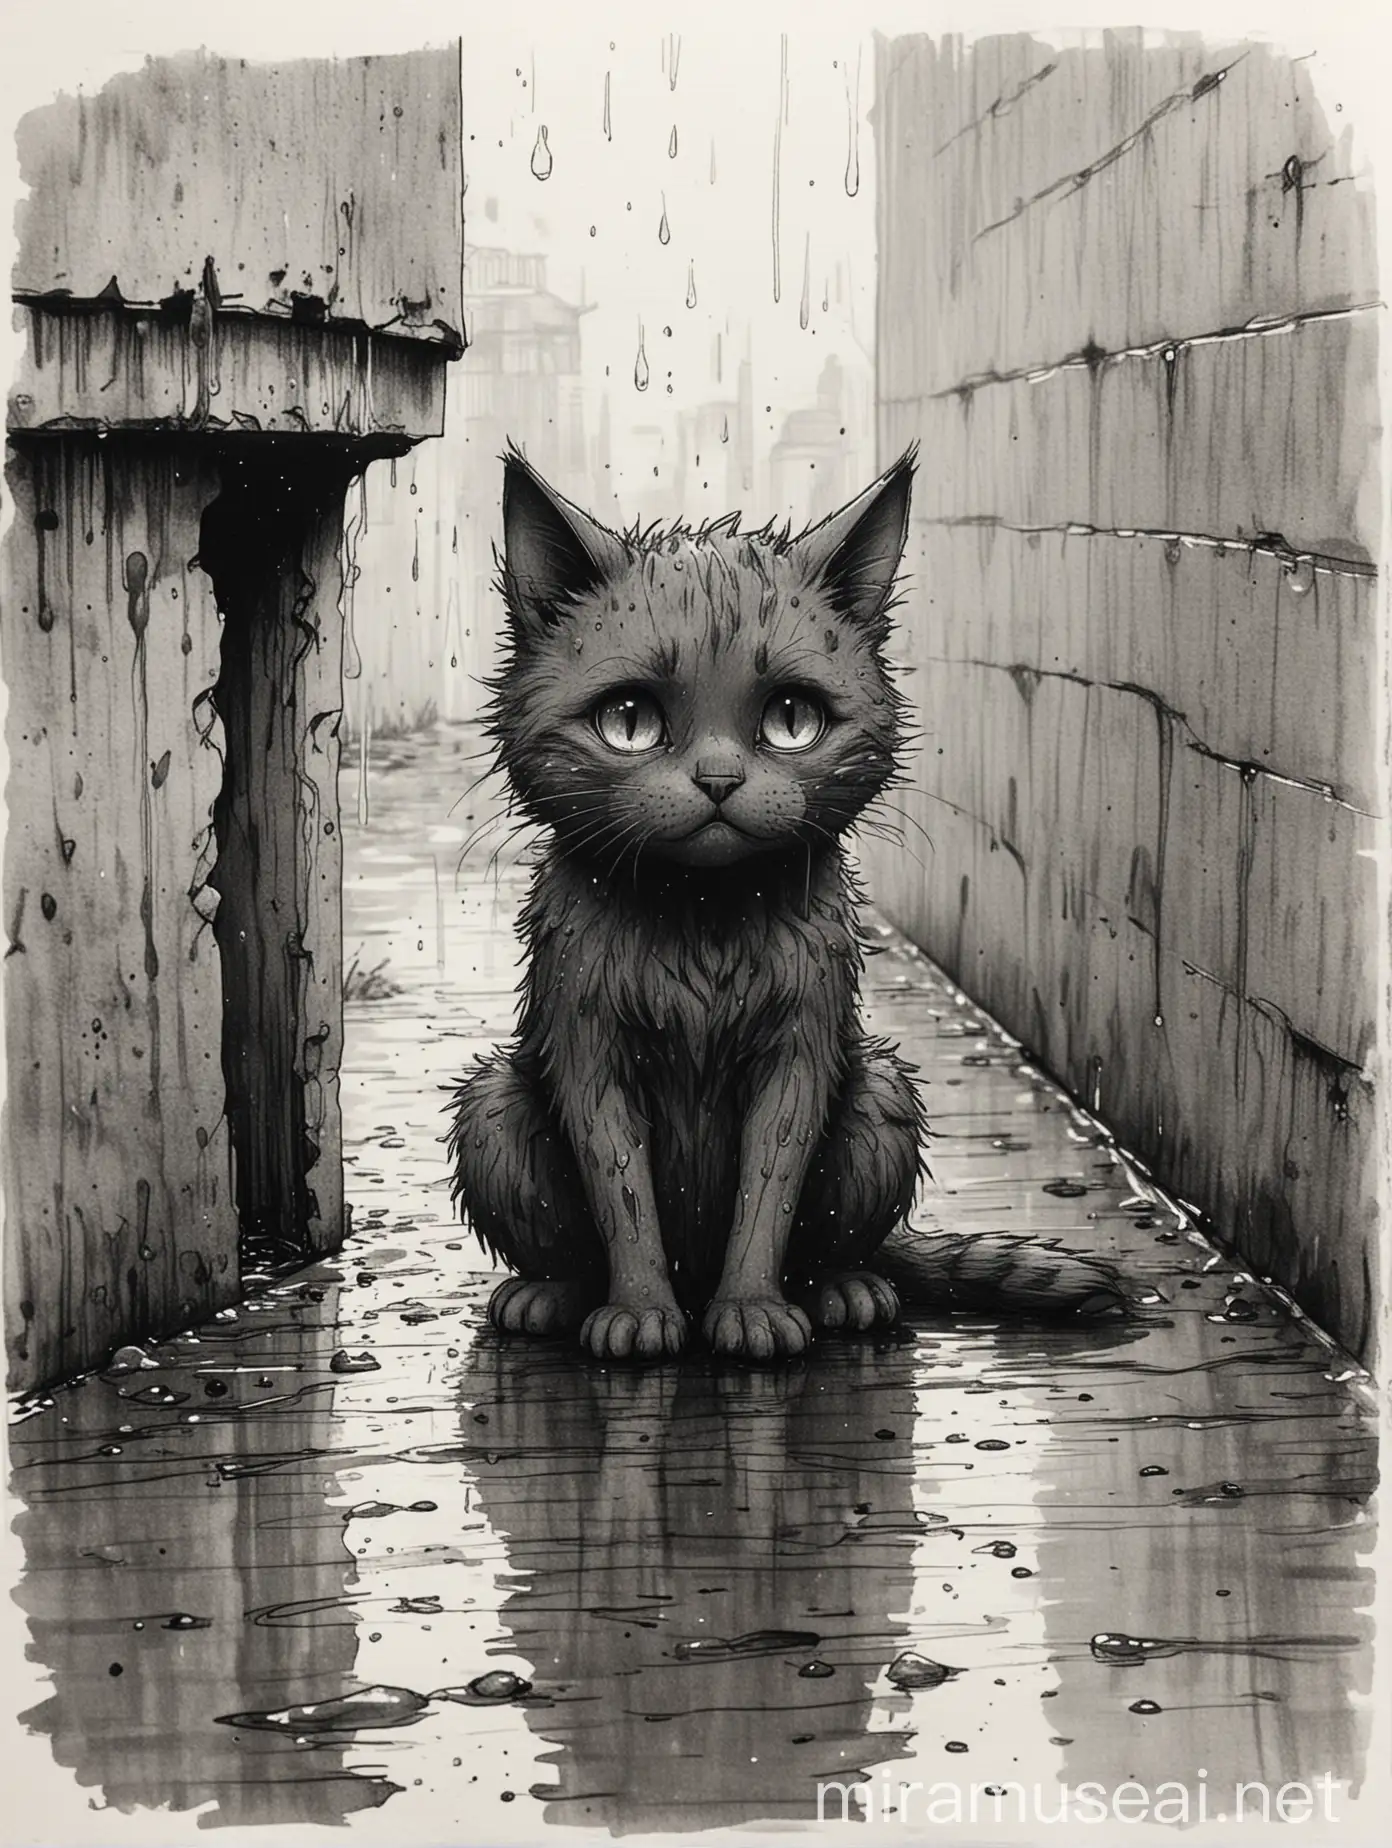 Lonely Sewer Cat Sketch in Rainy Atmosphere